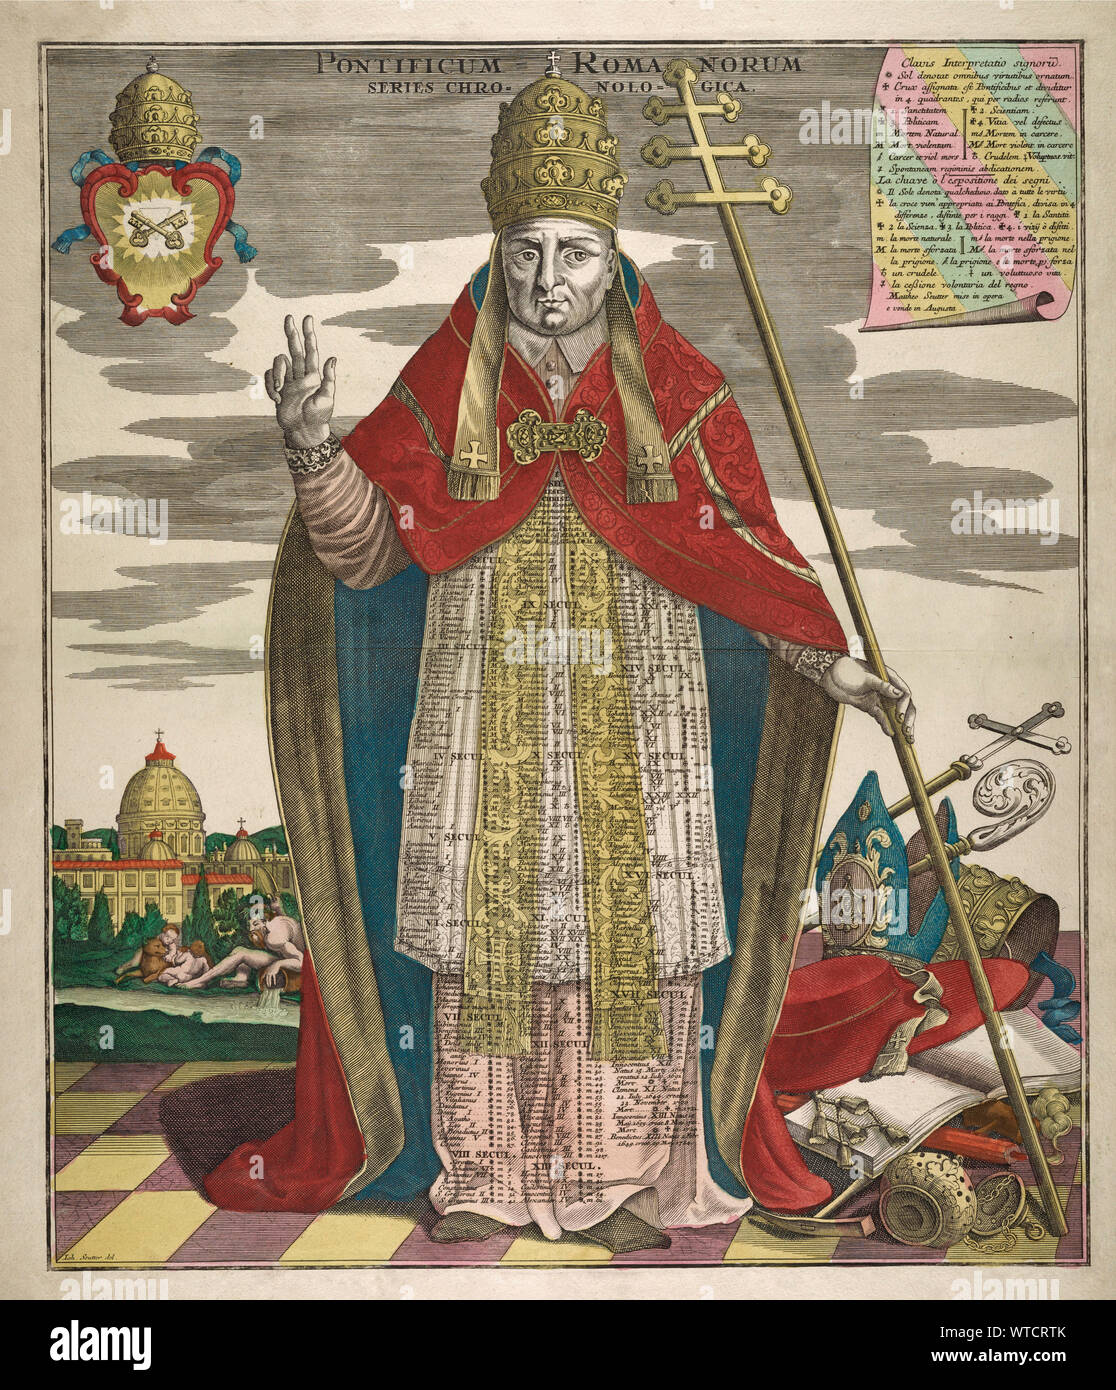 Engraving from atlas Novus. Pontificum Romanorum Series Chronologica. 1728. The image shows a pope, sceptre in one hand, the other hand raised. On his Stock Photo